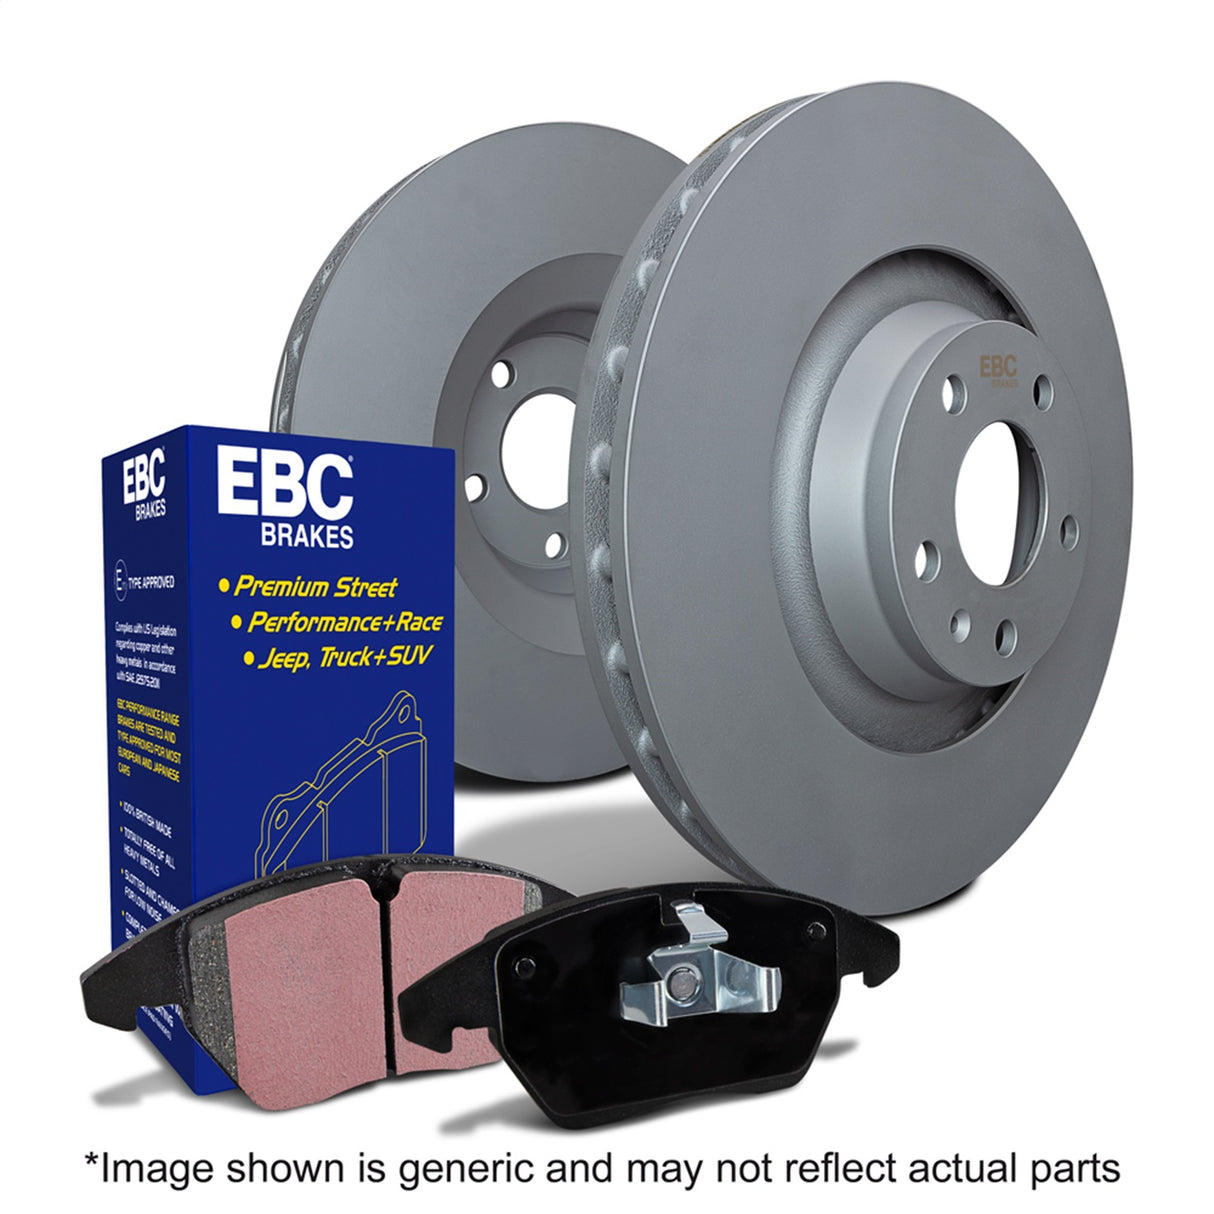 EBC Brakes S20K1299 S20 Kits Ultimax and Plain Rotors - Roam Overland Outfitters